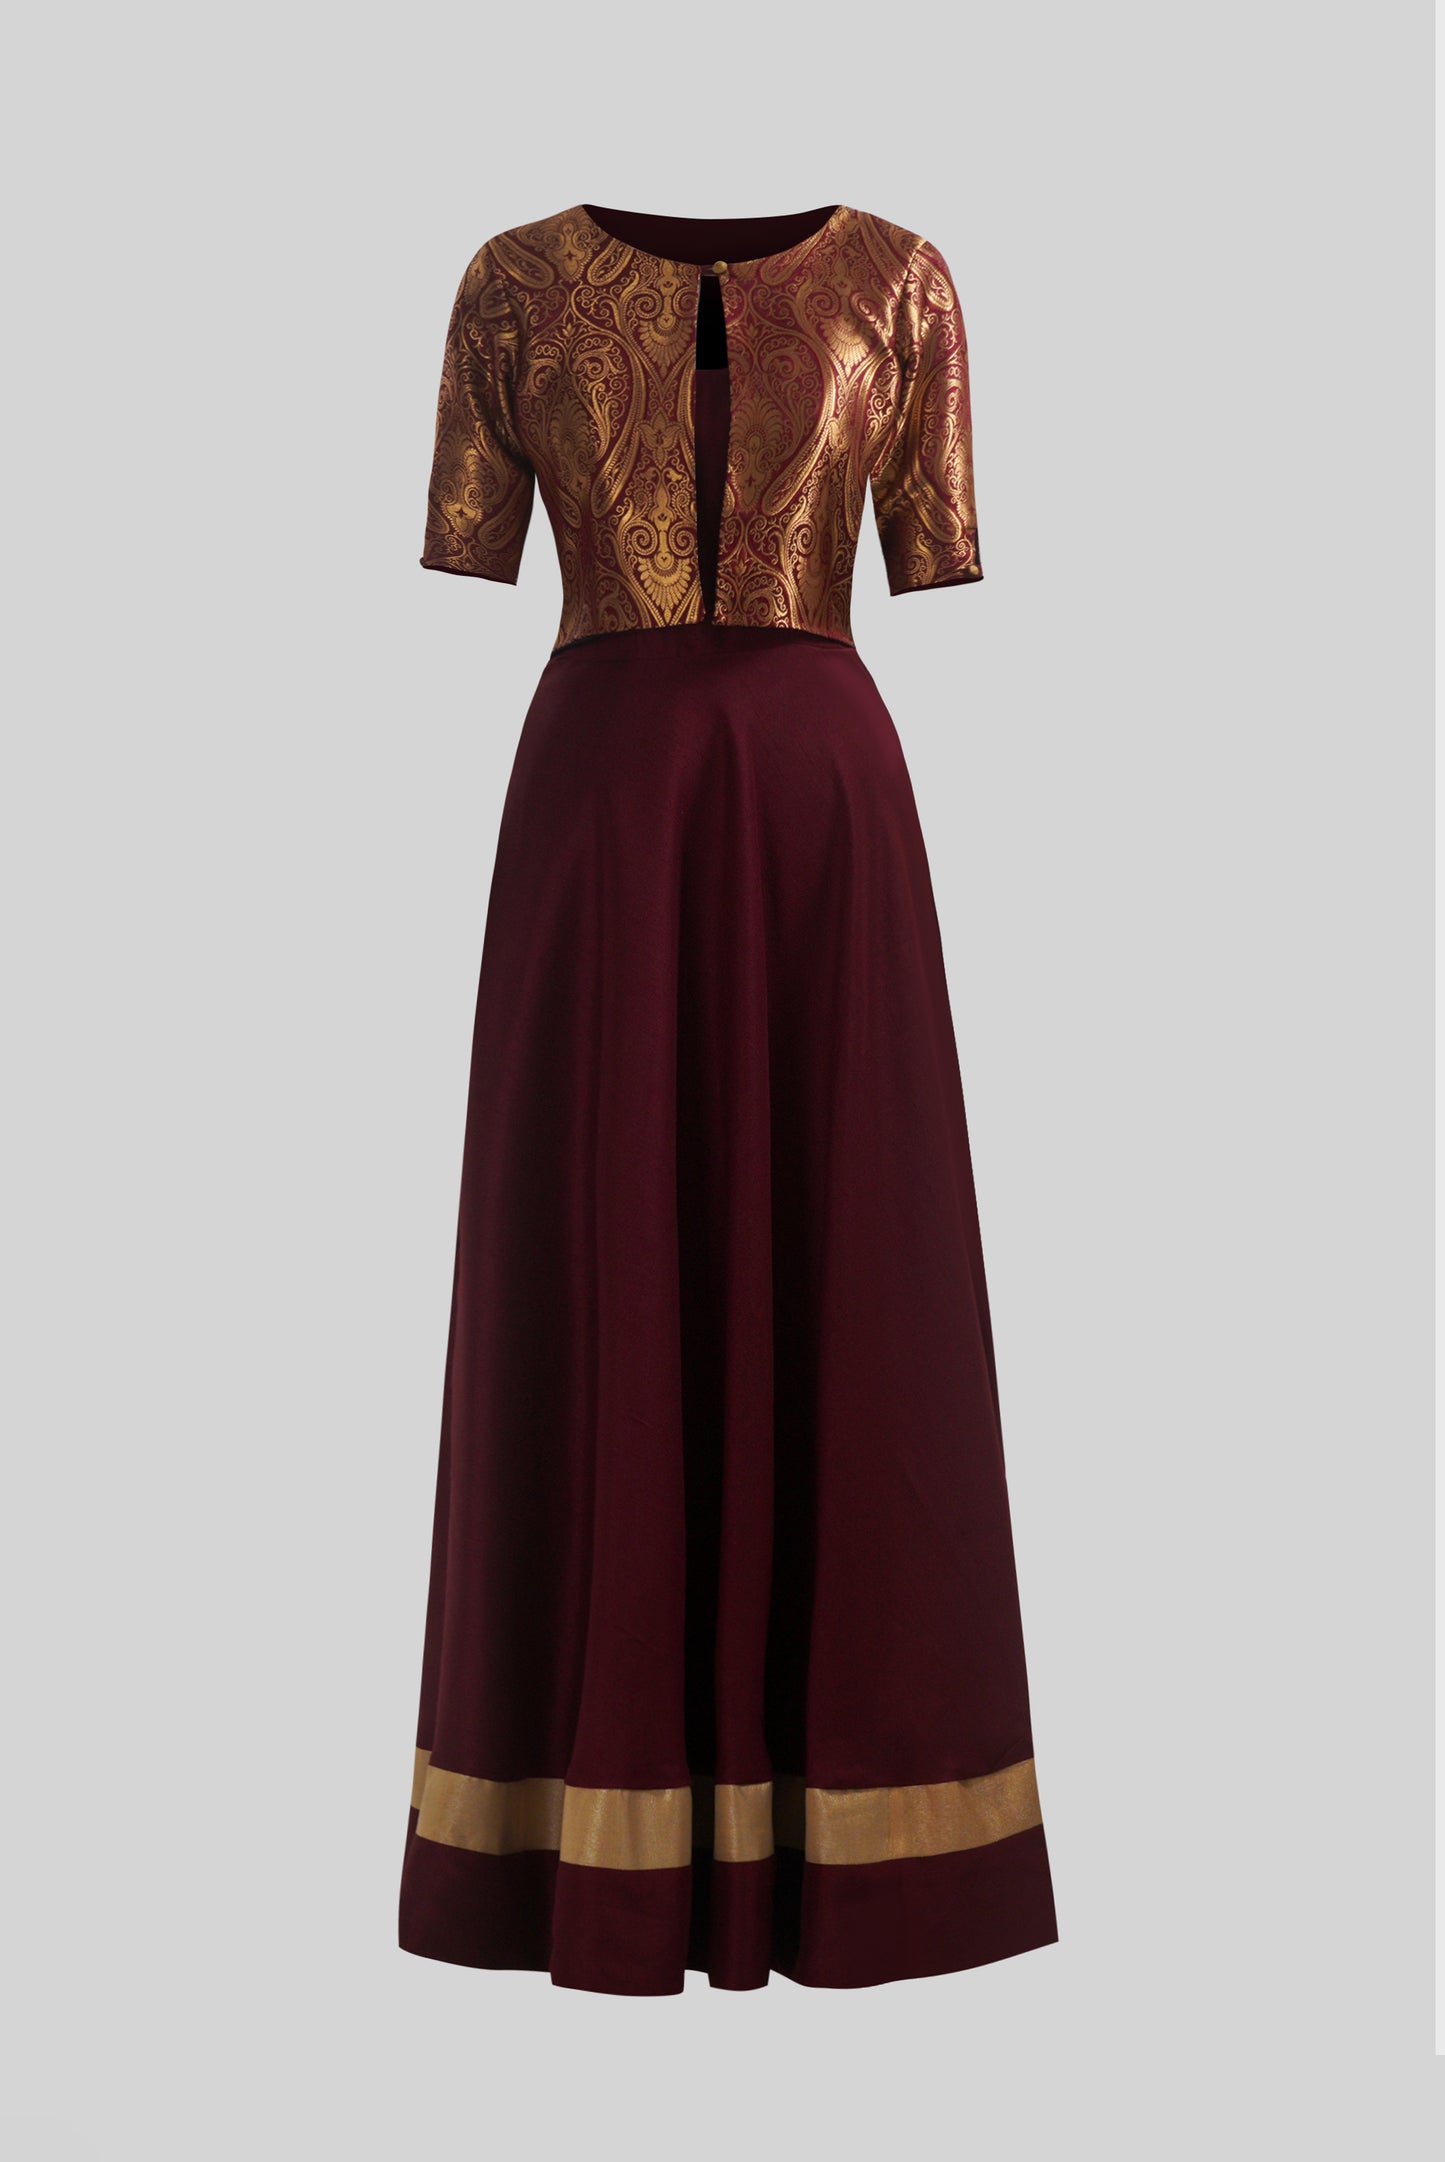 ZIA248 Maroon Brocade Full Length Gown with Boat Neck